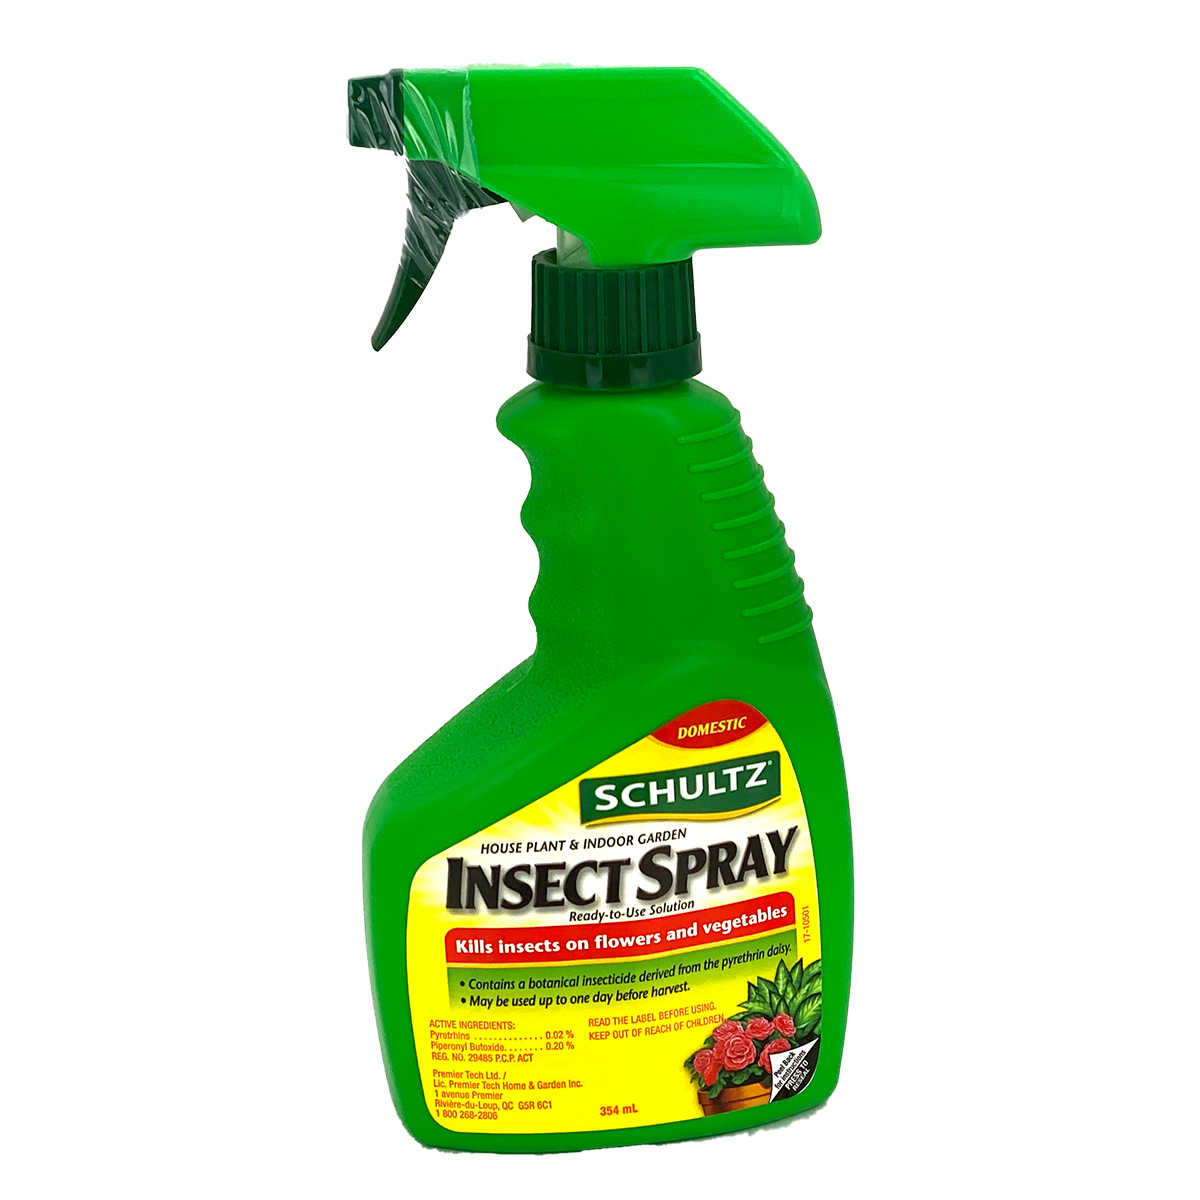 House plant insecticide Idea